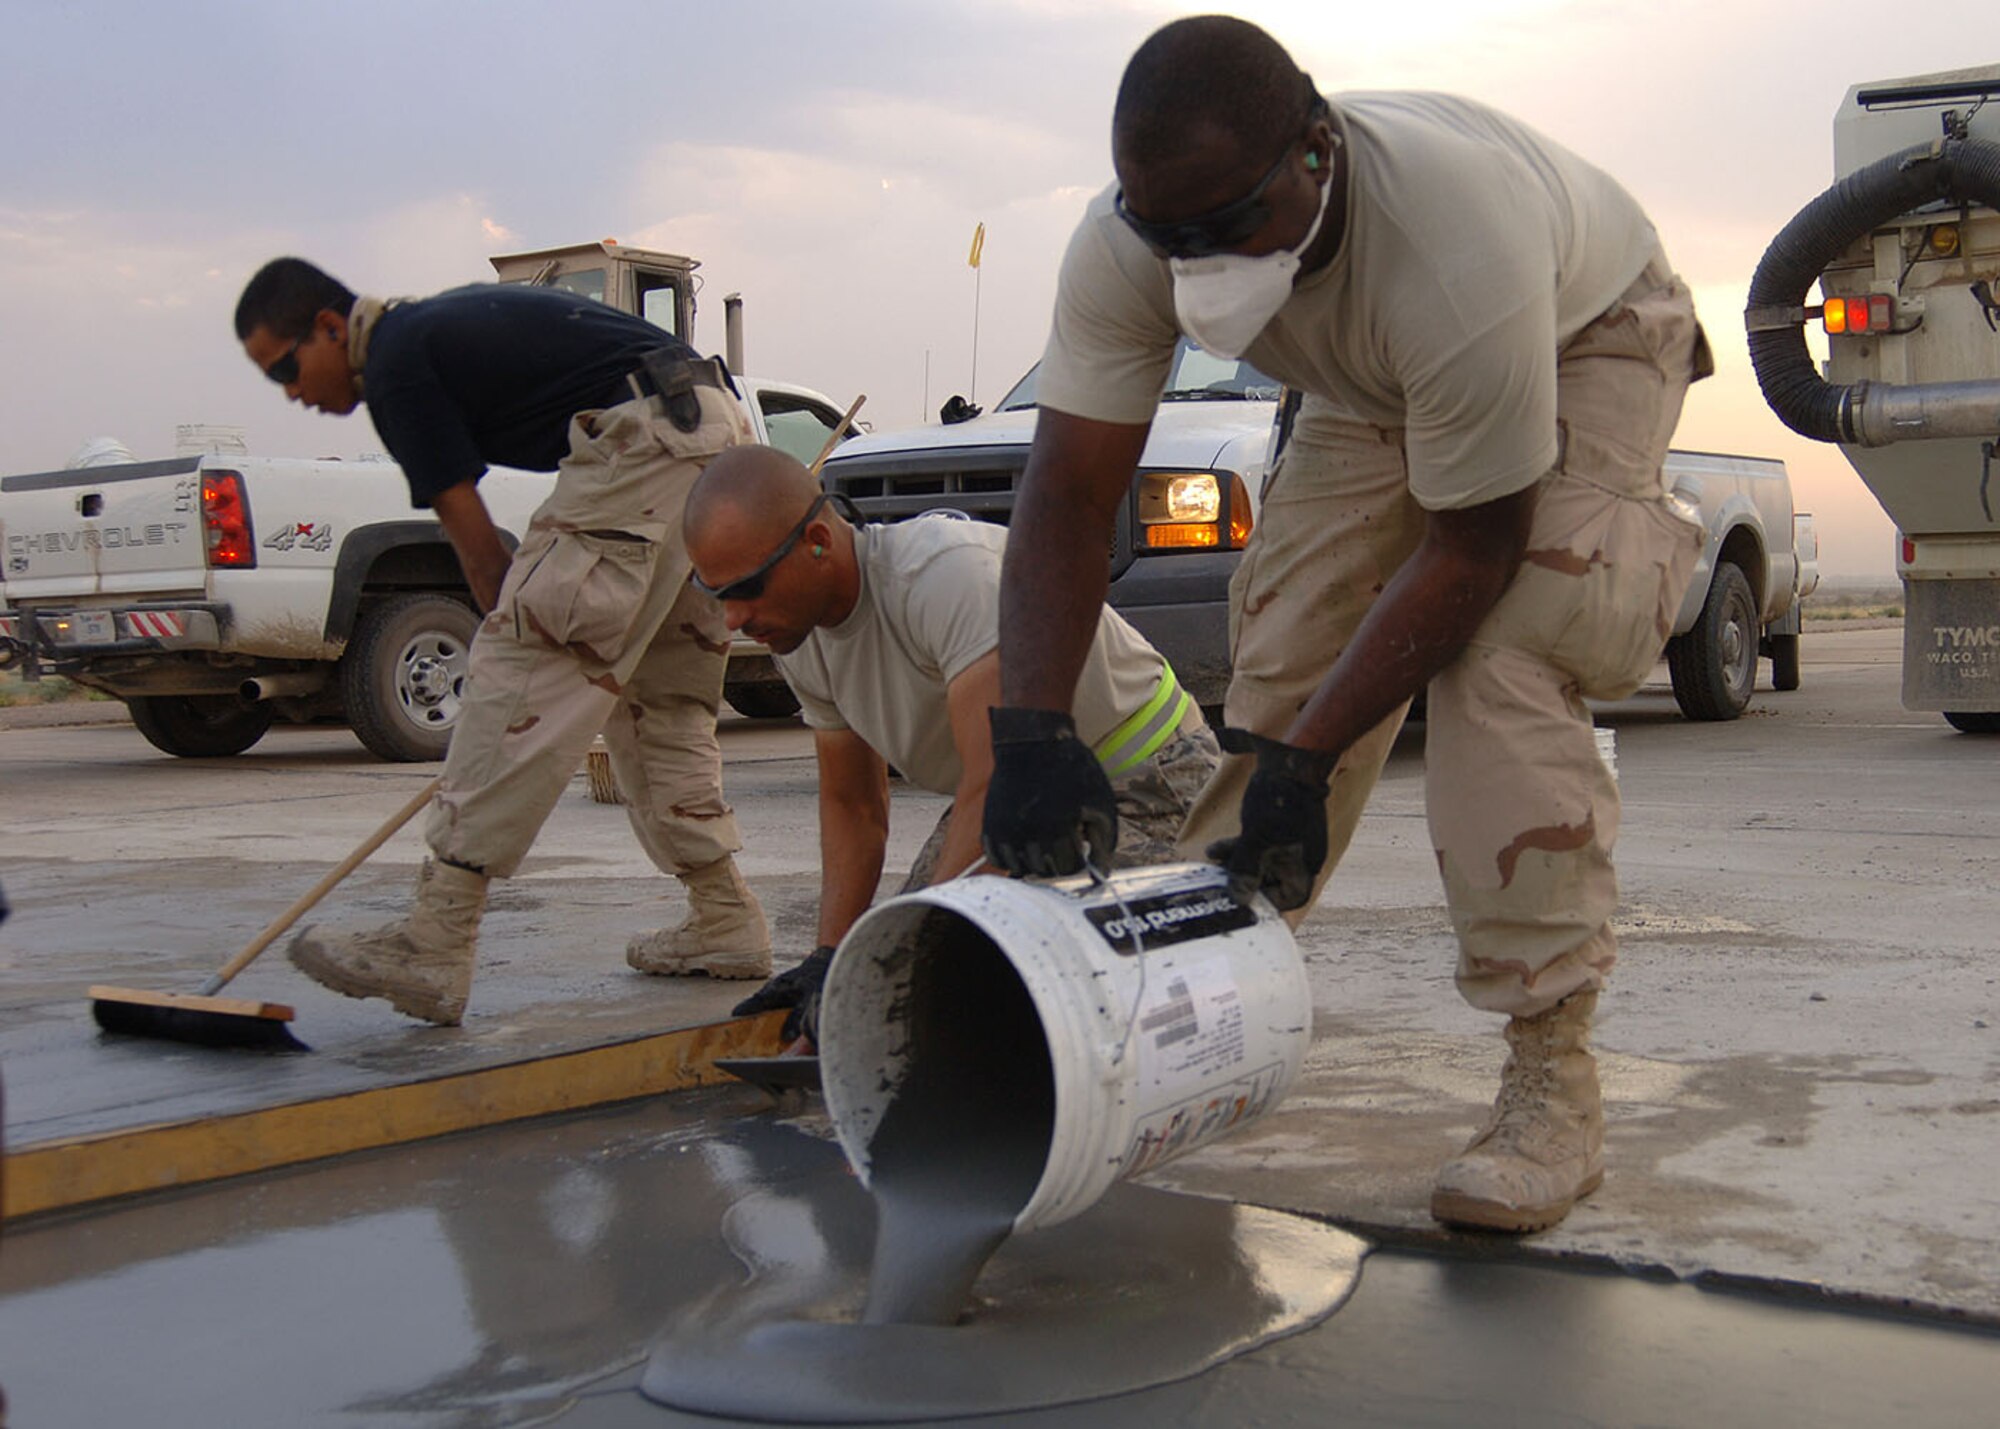 SATHER AIR BASE, Iraq -- Tech. Sgt. Freddie Garrette pours freshly mixed concrete into a 100 square foot spall repair area Oct. 6 while Tech. Sgt. Jeff Jones, center, smoothes the edges and Senior Airman Wilson Quinante brushes the surface of a smoothed section to give it an anti-skid surface. The 447th Expeditionary Civil Engineer Squadron Heavy Equipment Operations “Dirt Boys” repair damaged surface areas on the airfield here each Saturday morning. The team gets an early start, often working before sunrise, to beat the daytime high temperatures, which helps ensure a proper mixture cure time and a stronger slab. The team must also work quickly to limit the amount of time airfield operations are affected while repairs are done. Sather AB is the busiest airfield in Iraq, averaging 4,000 transient aircraft activities each month. Sergeant Garrette is deployed from the Tennessee Air National Guard. Sergeant Jones is deployed from Elmendorf Air Force Base, Alaska.  Airman Quinante is deployed from Eglin Air Force Base, Fla. (Staff Sgt. Jennifer Lindsey)